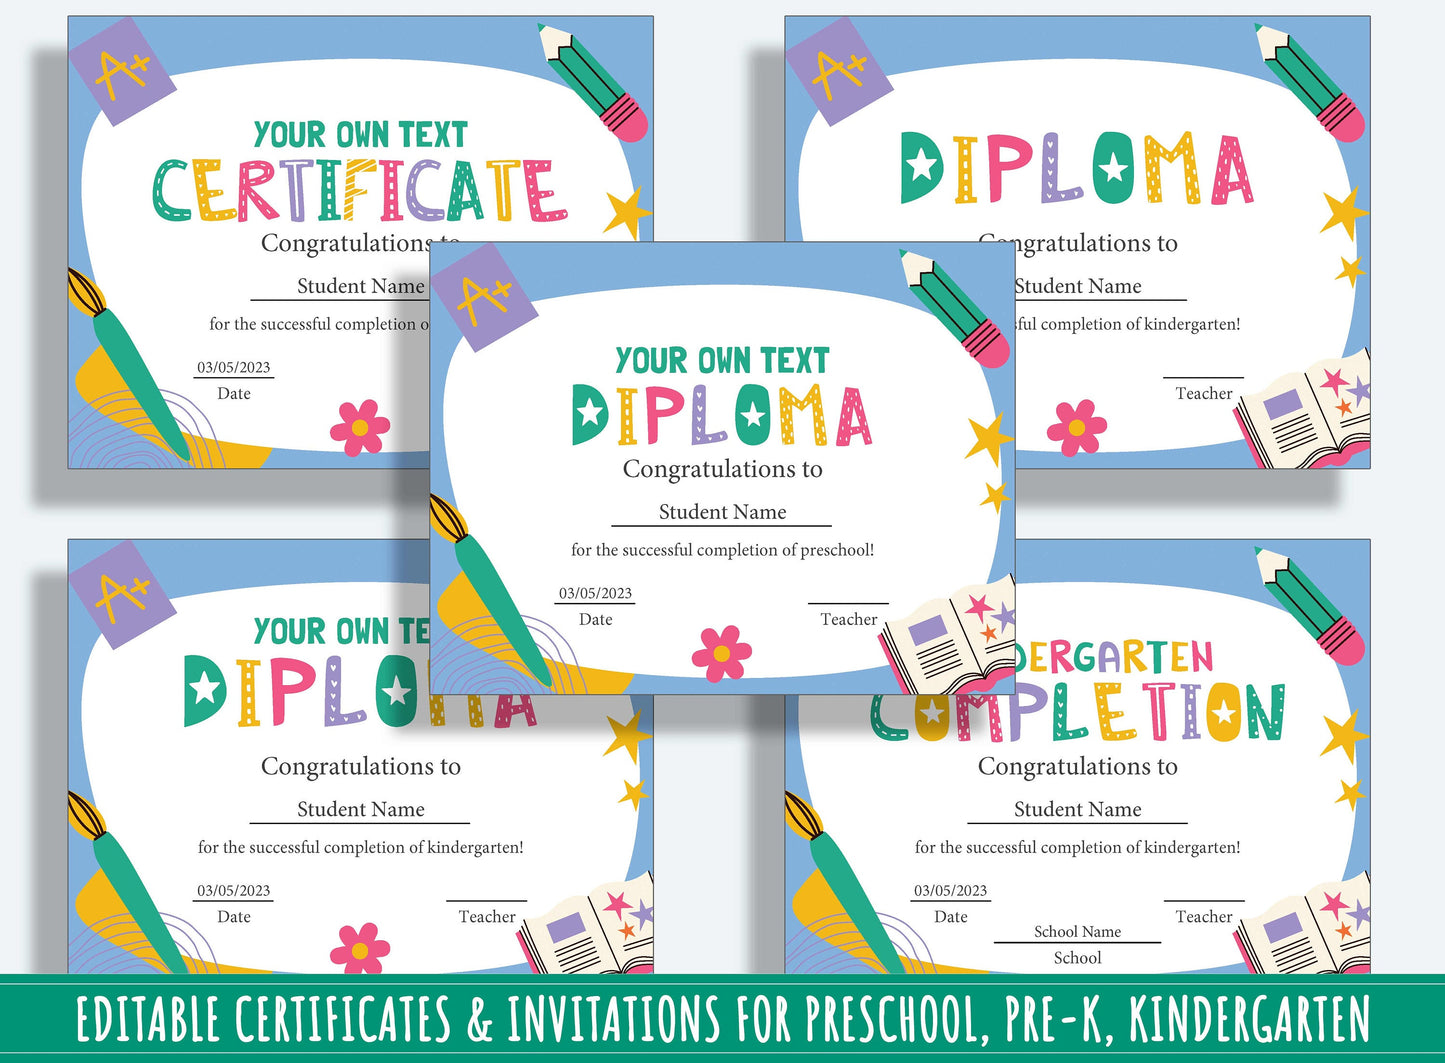 Preschool Certificate End of the Year, Editable Preschool Certificates, Diplomas, Completions, and Invitations, PDF File, Instant Download